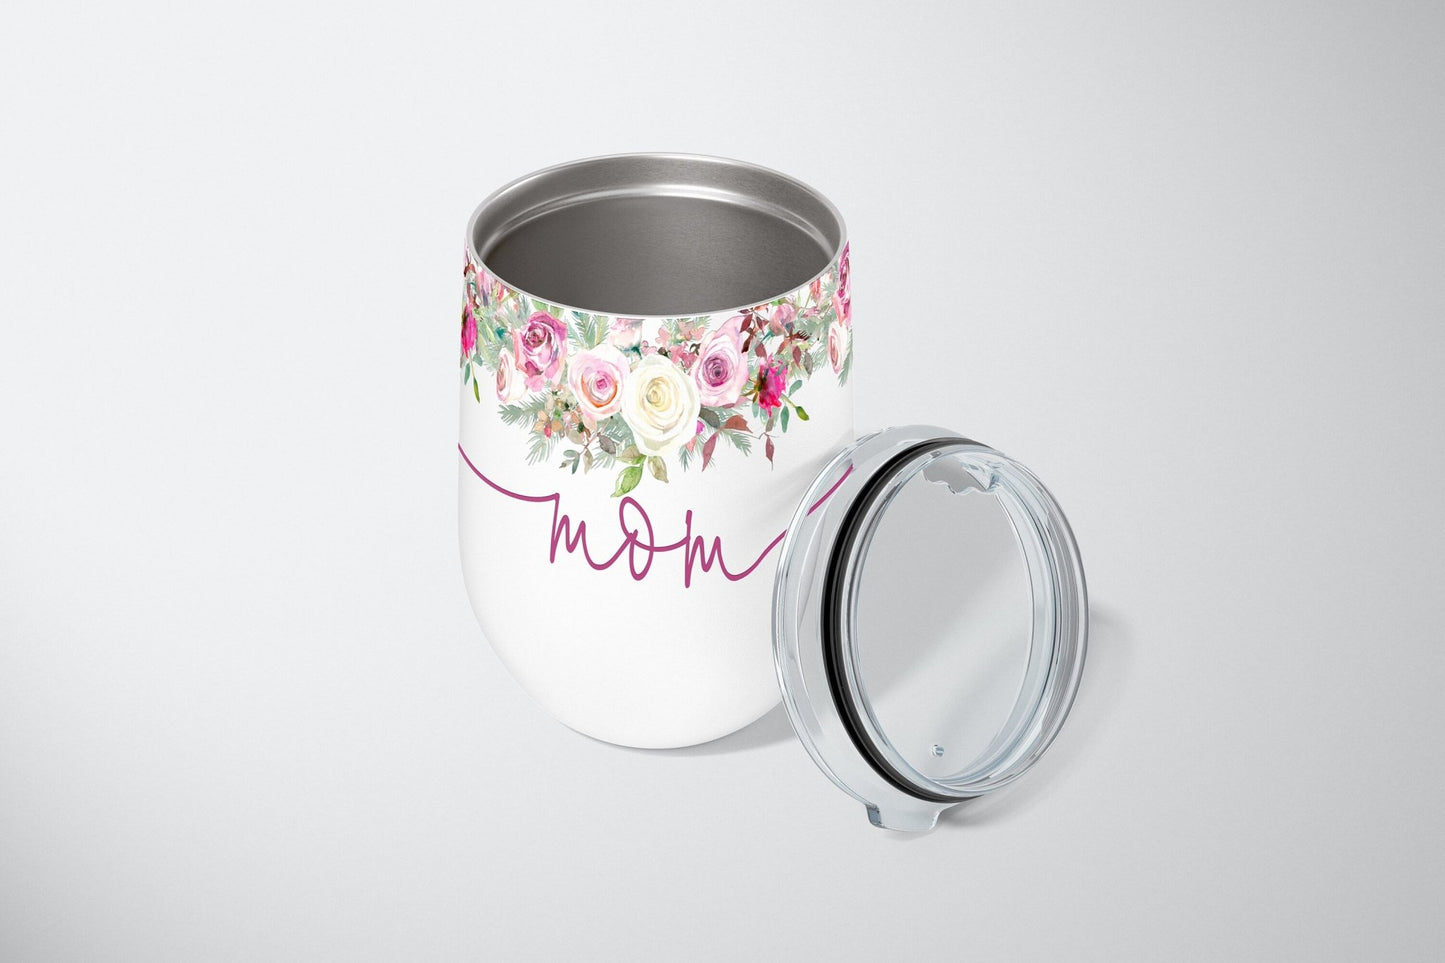 Bridesmaid Wine Tumbler Personalized Bridesmaid Gift Floral Wine Glass w/ Name Wedding Party Gift Stainless Steel Wine Tumbler Fast Shipping - Squishy Cheeks